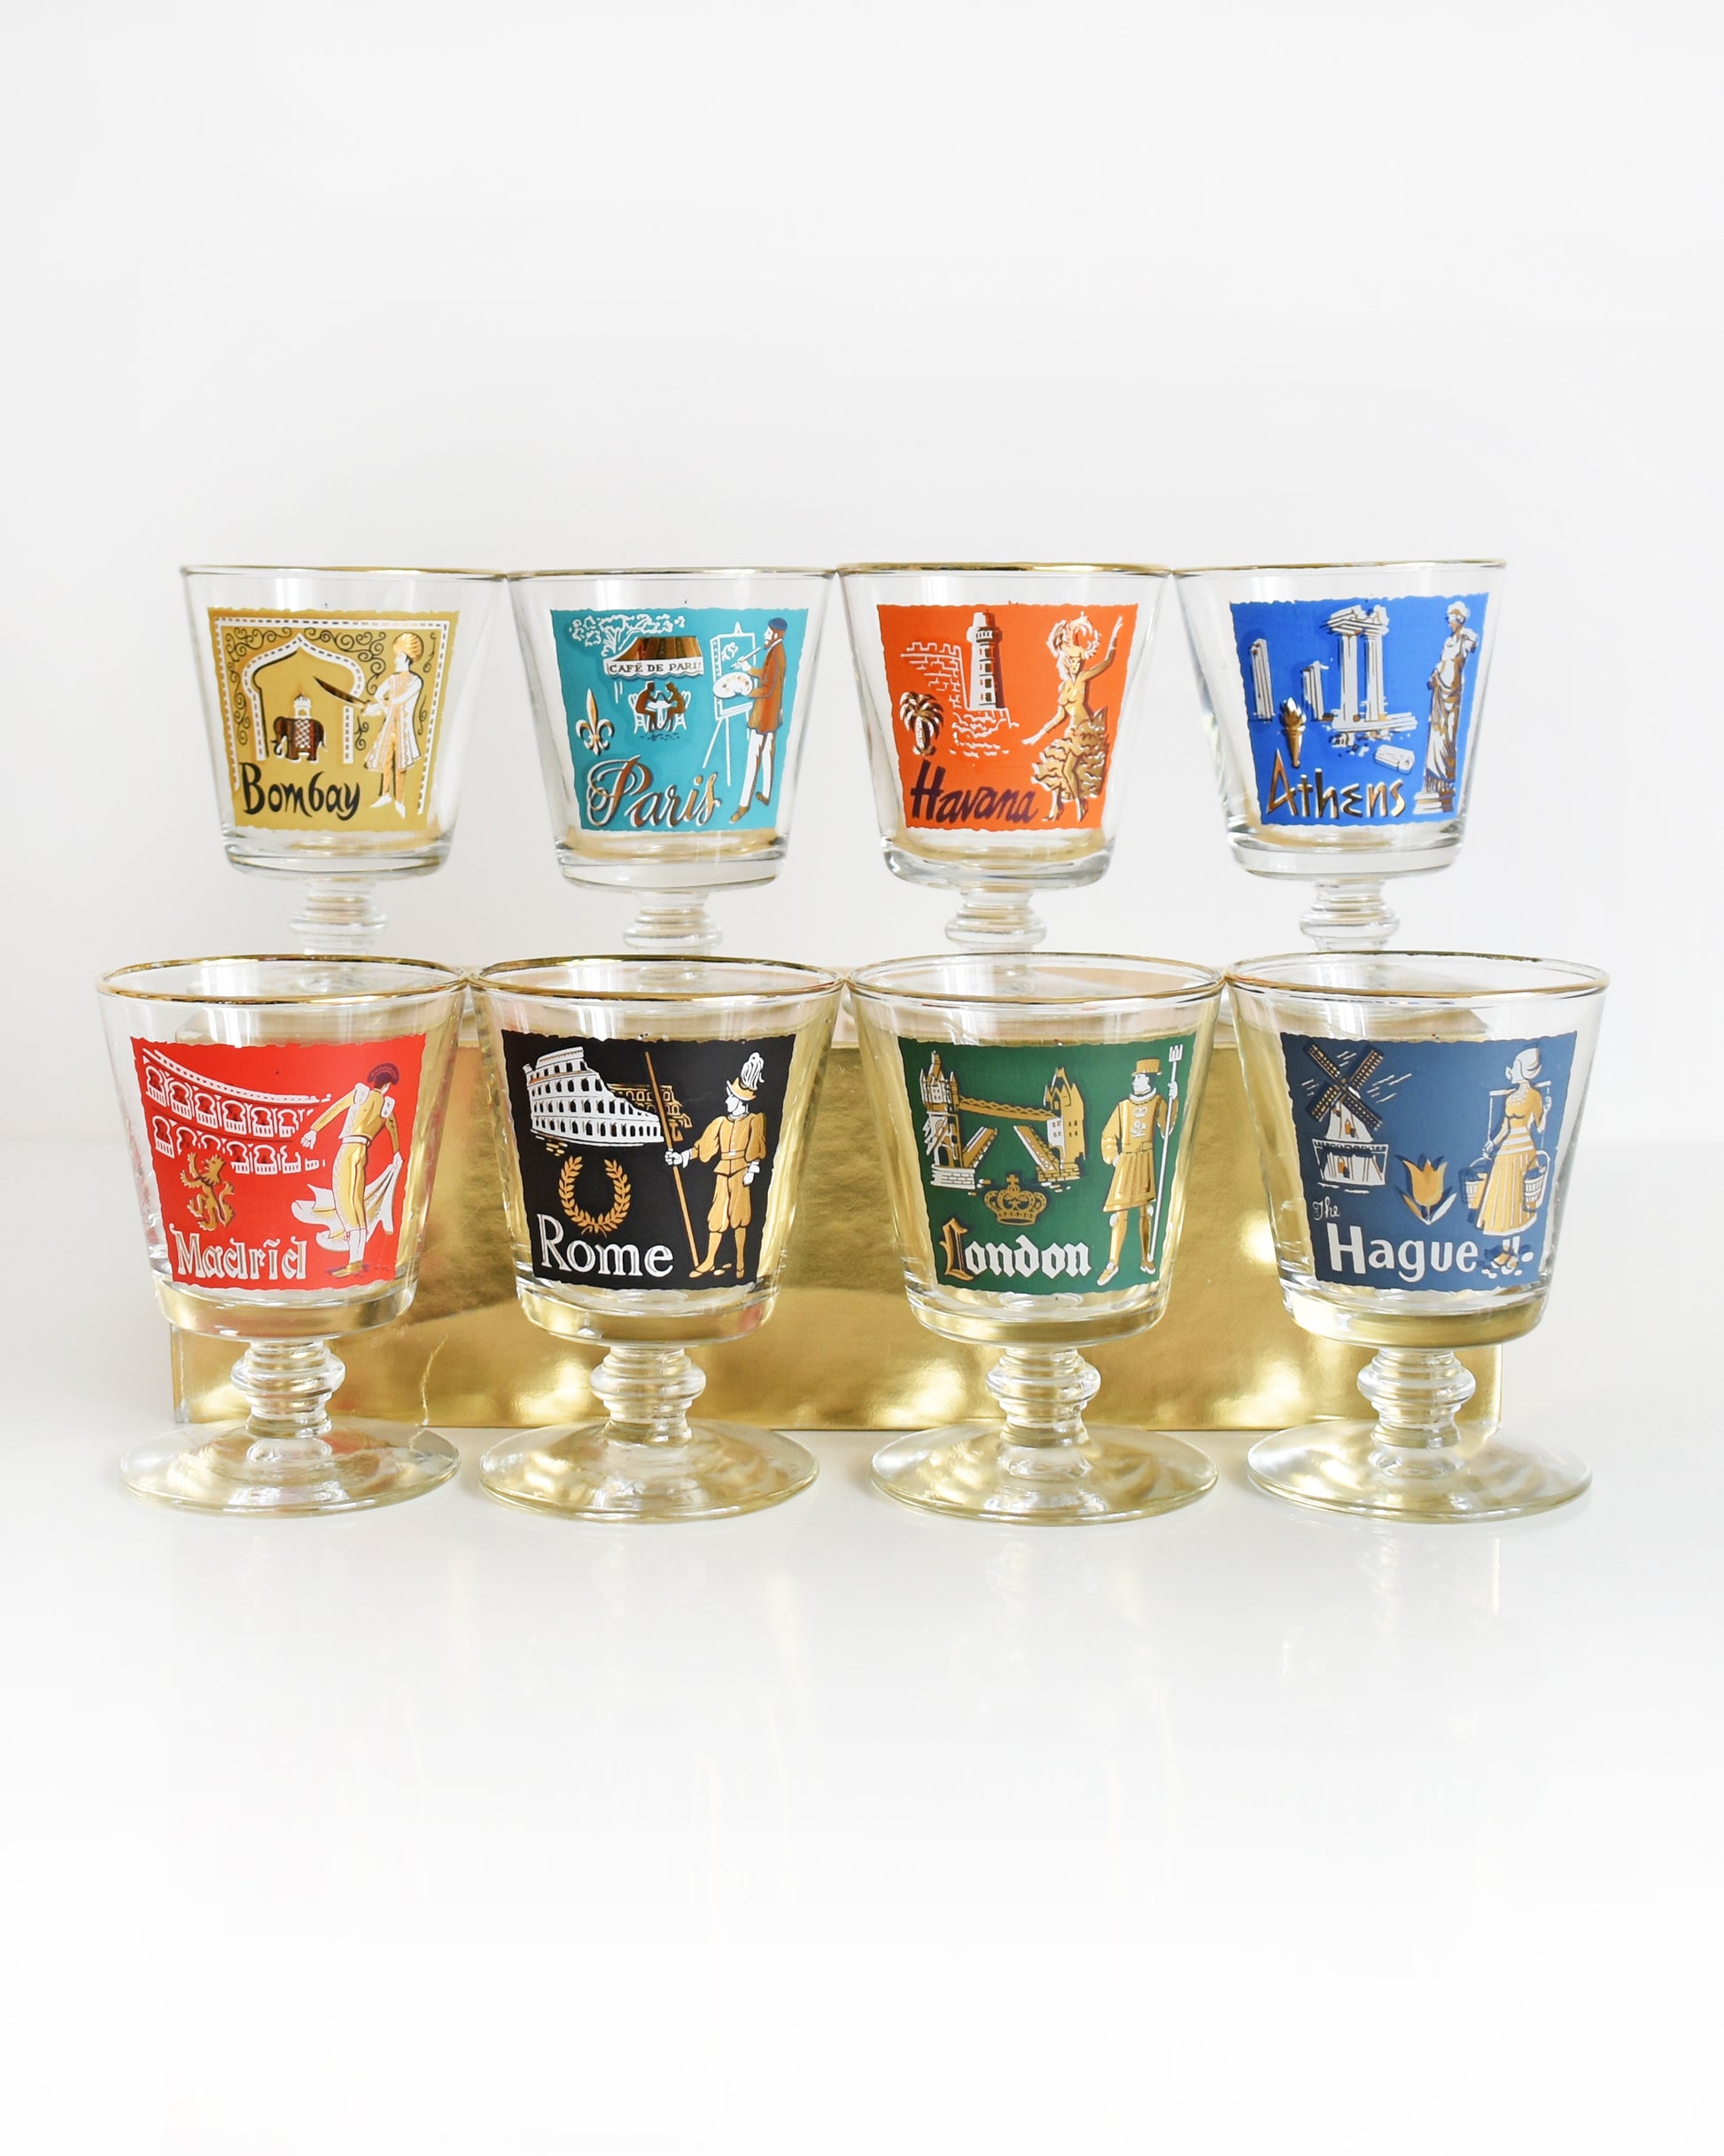 This Libbey International Set features 8 mid century city colorful glasses with distinct scenes, metallic gold/white accents. The top row is Bombay, Paris, Havana, Athens and they sit on a gold box. The bottom row is Madrid, Rome, London, The Hague